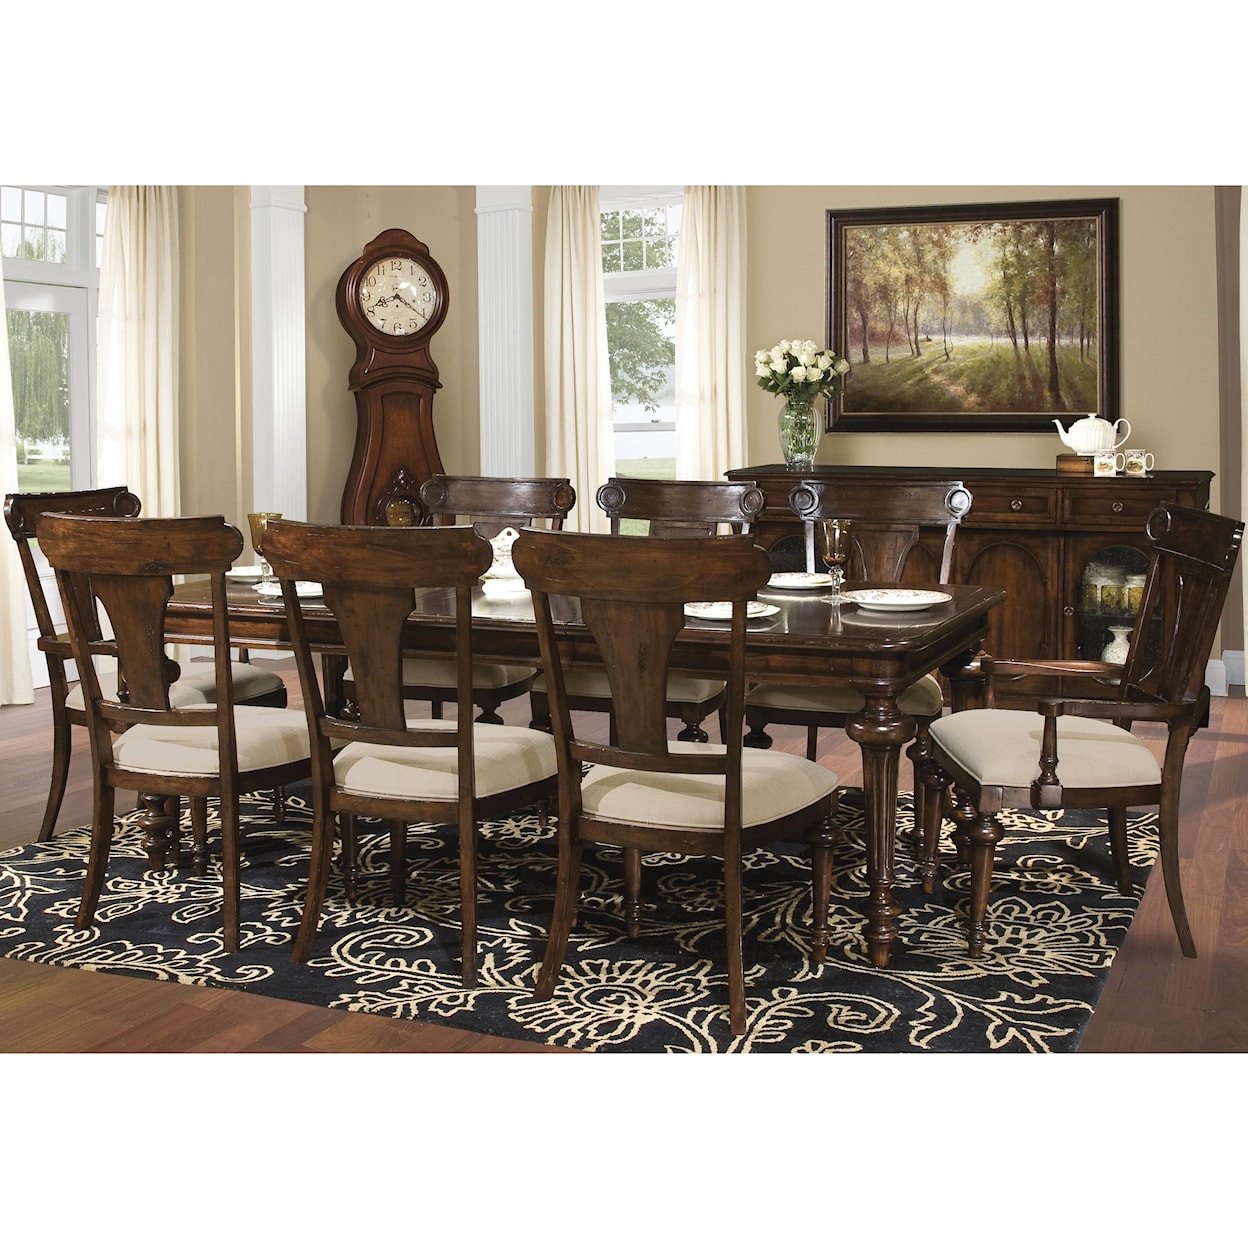 Hekman Charleston Place Table and Chair Set